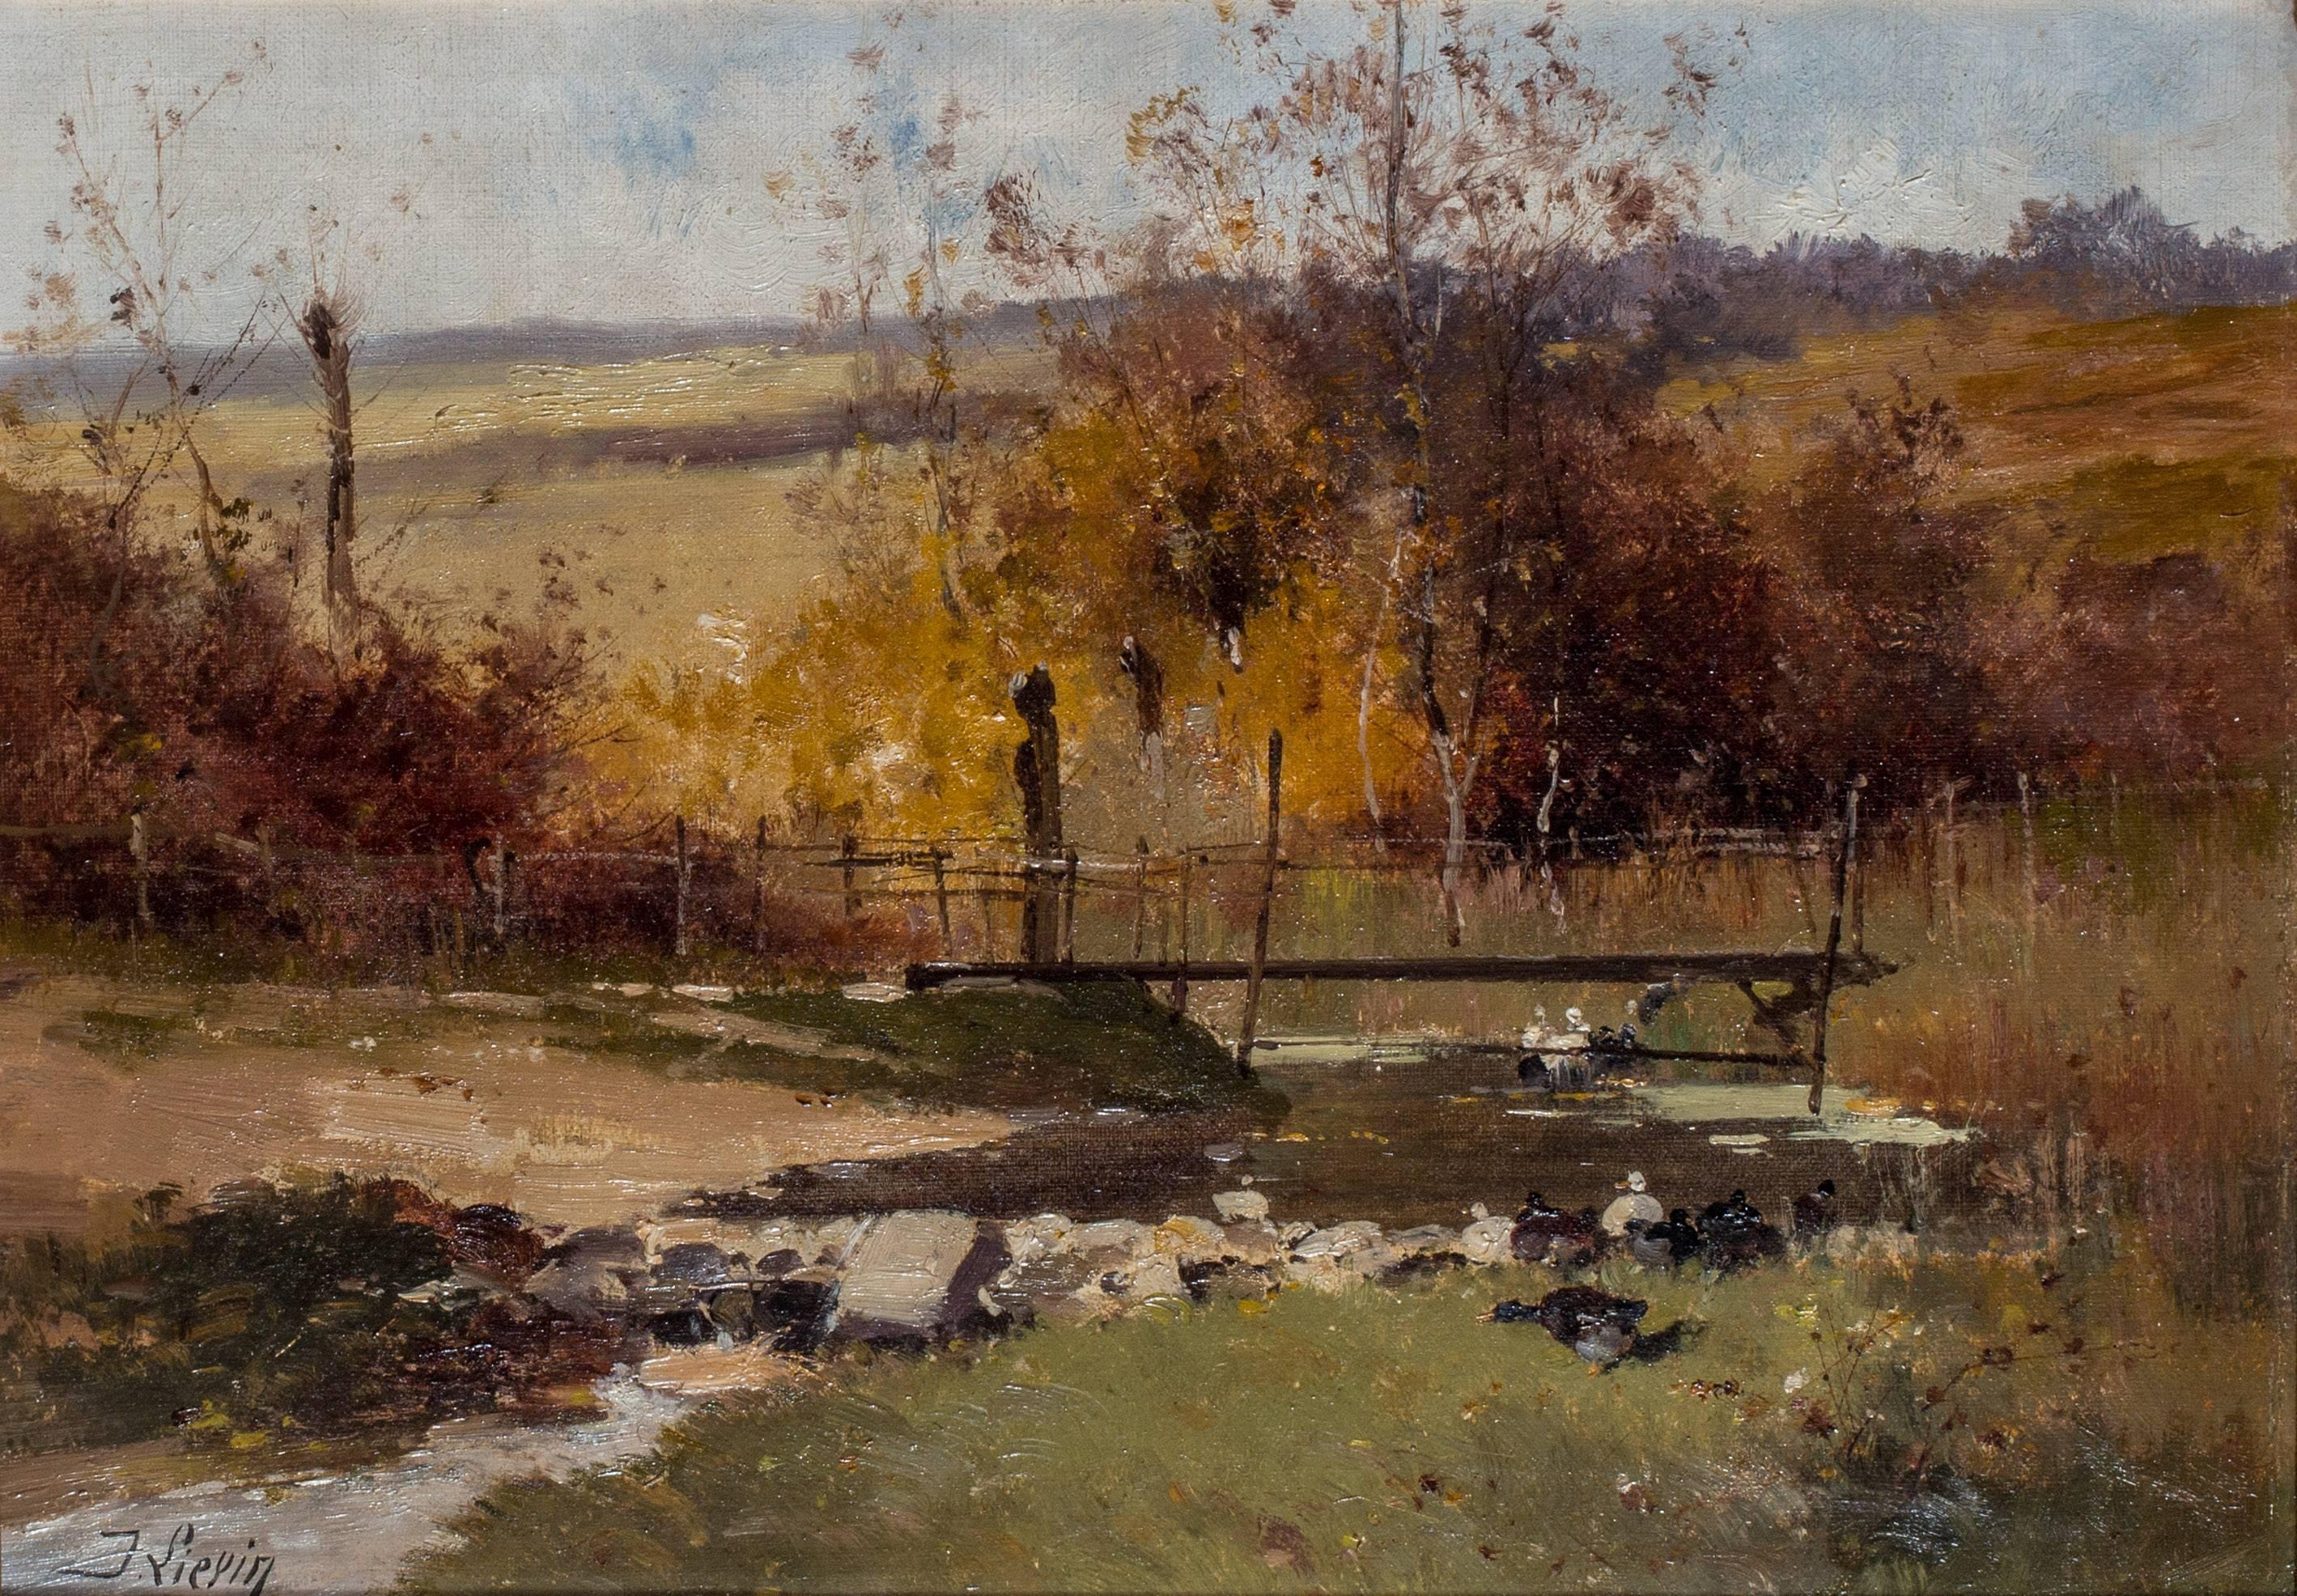 Ducks by a stream - Painting by Eugene Galien-Laloue